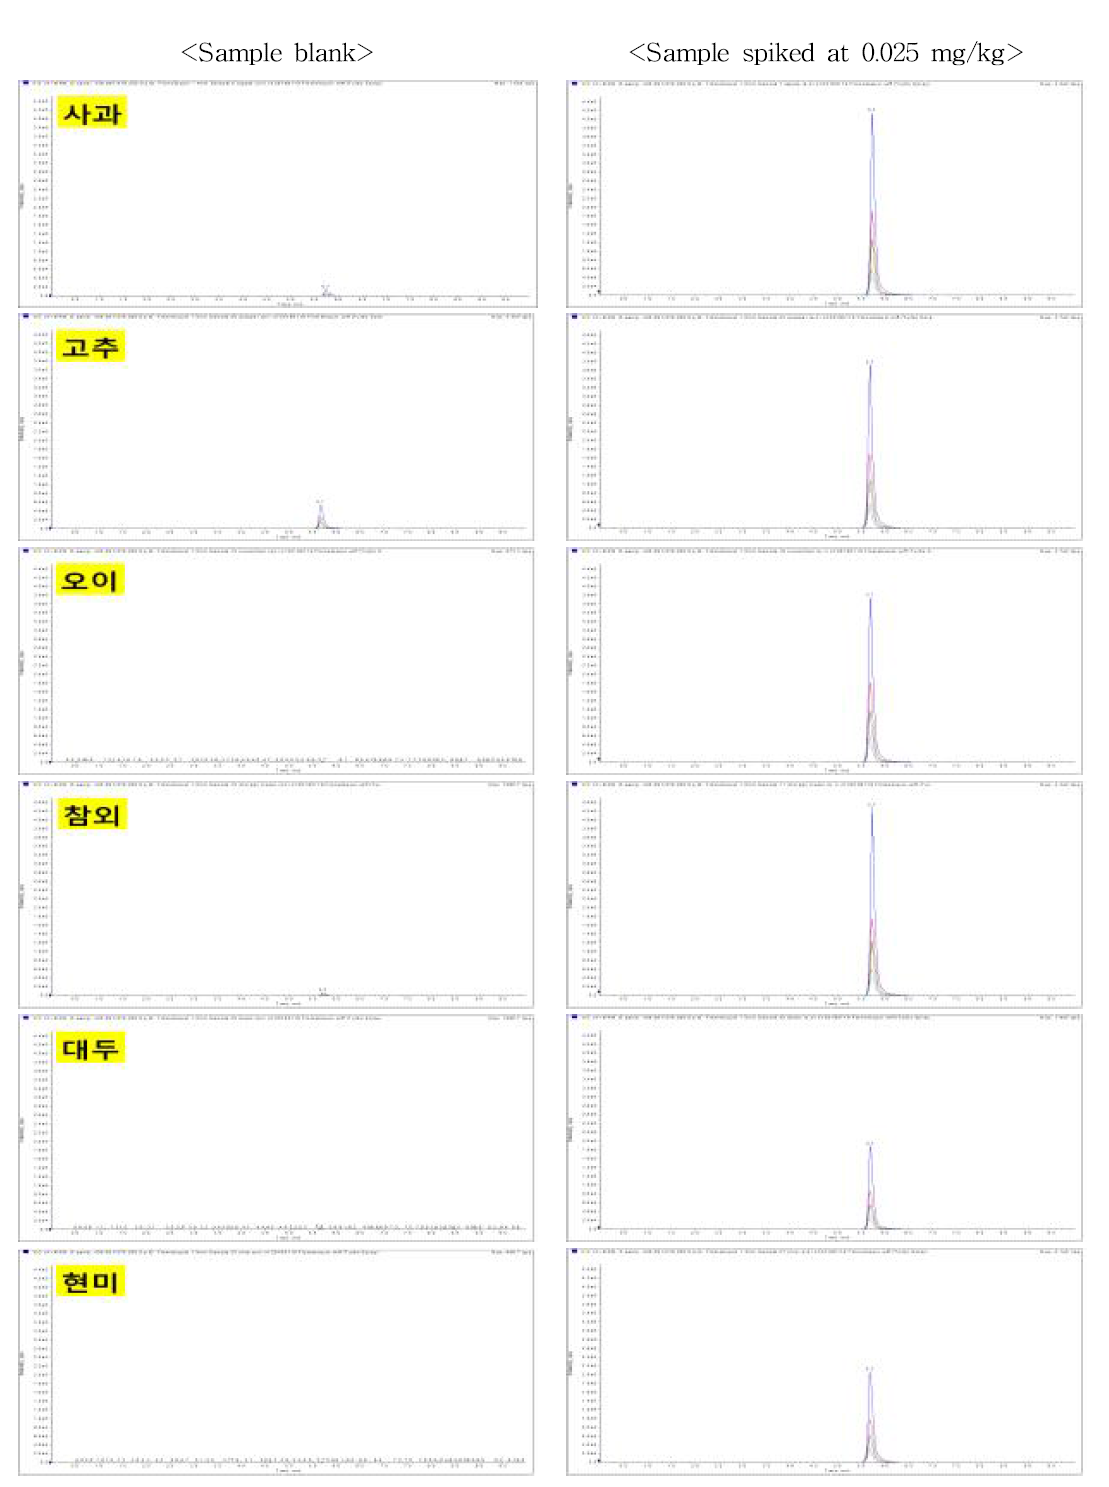 Chromatogram of flometoquin in sample extracts obtained by sample preparation and HPLC-MS/MS MRM mode analysis at 0.025 mg/kg spiking level